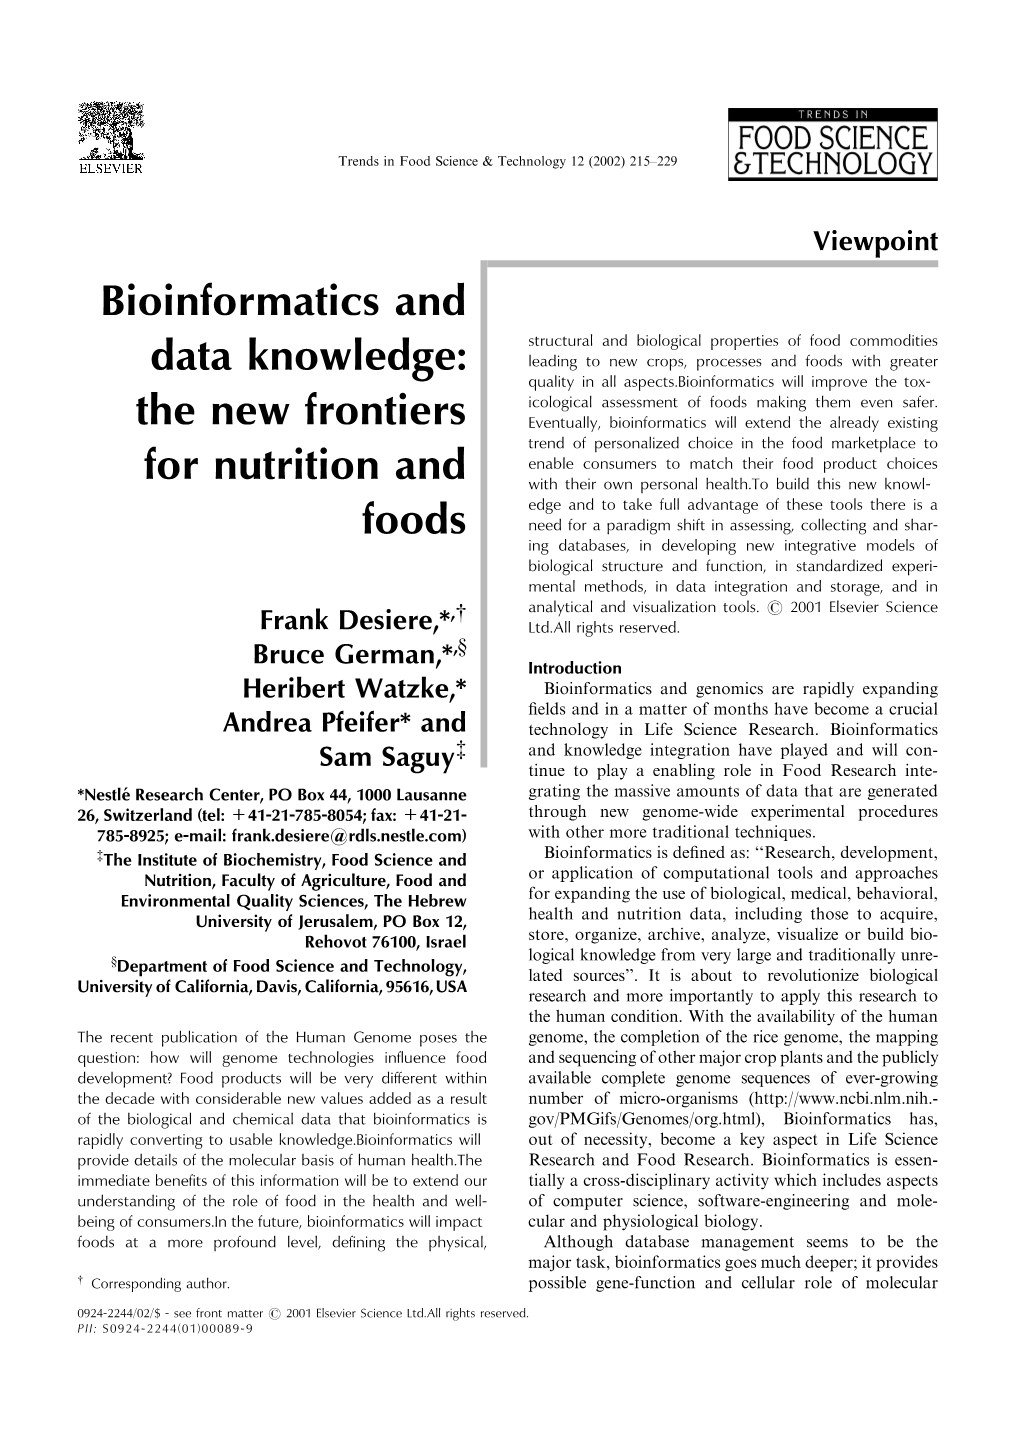 Bioinformatics and Data Knowledge: the New Frontiers for Nutrition And